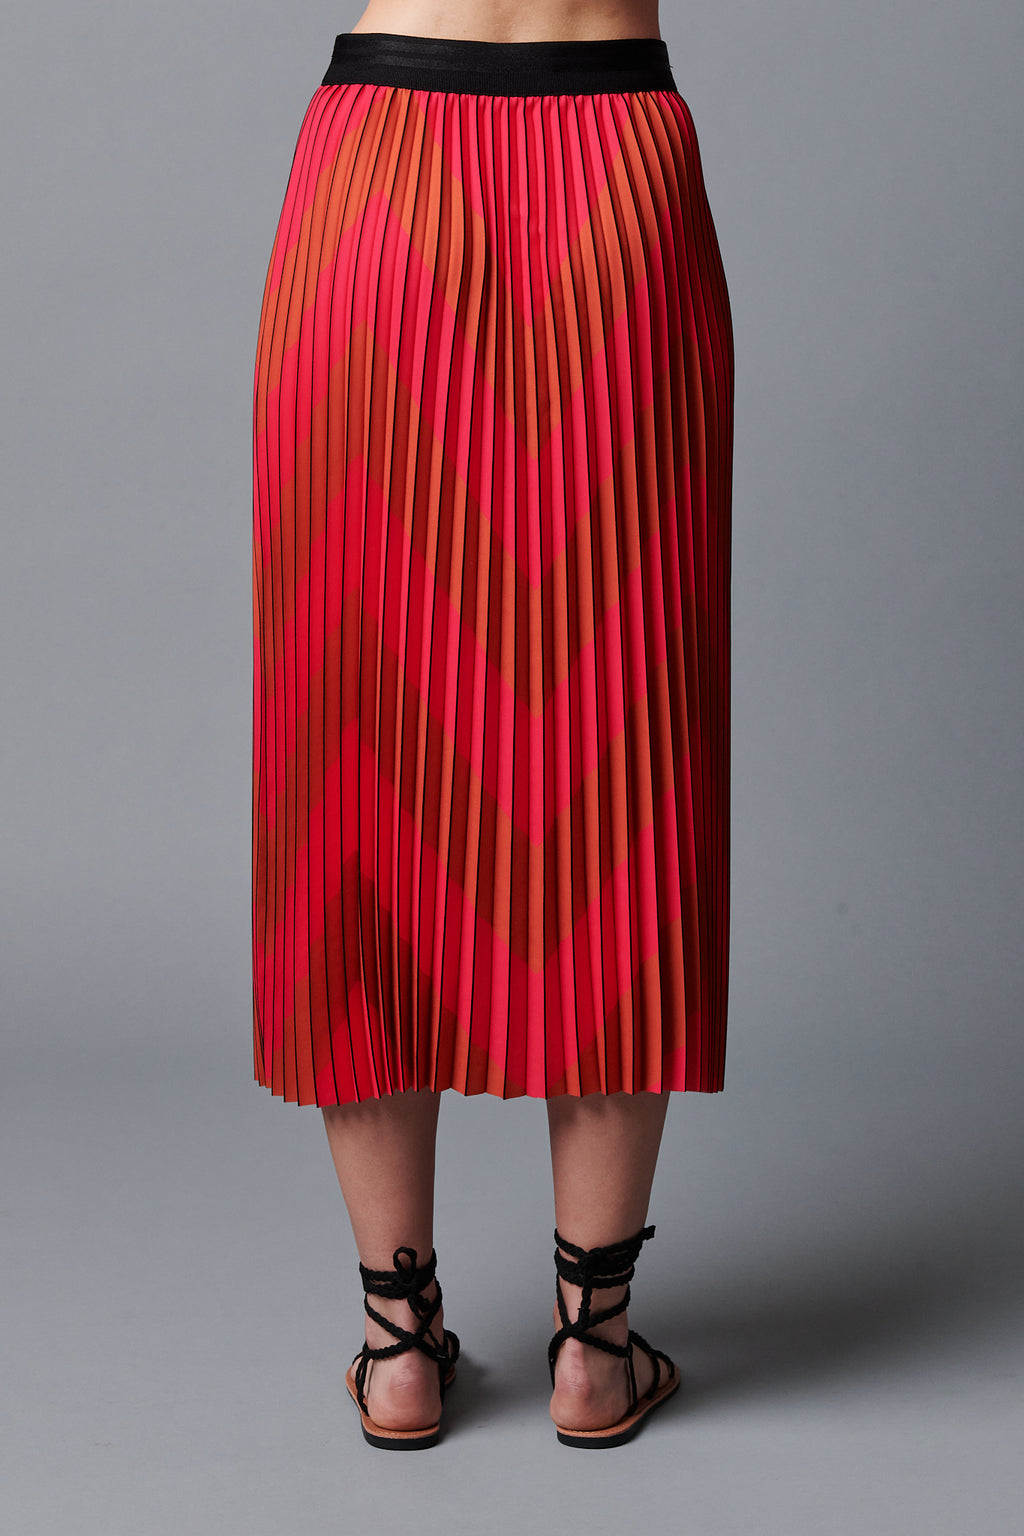 Le Superbe Chevron Pleated Skirt in Pink/Red